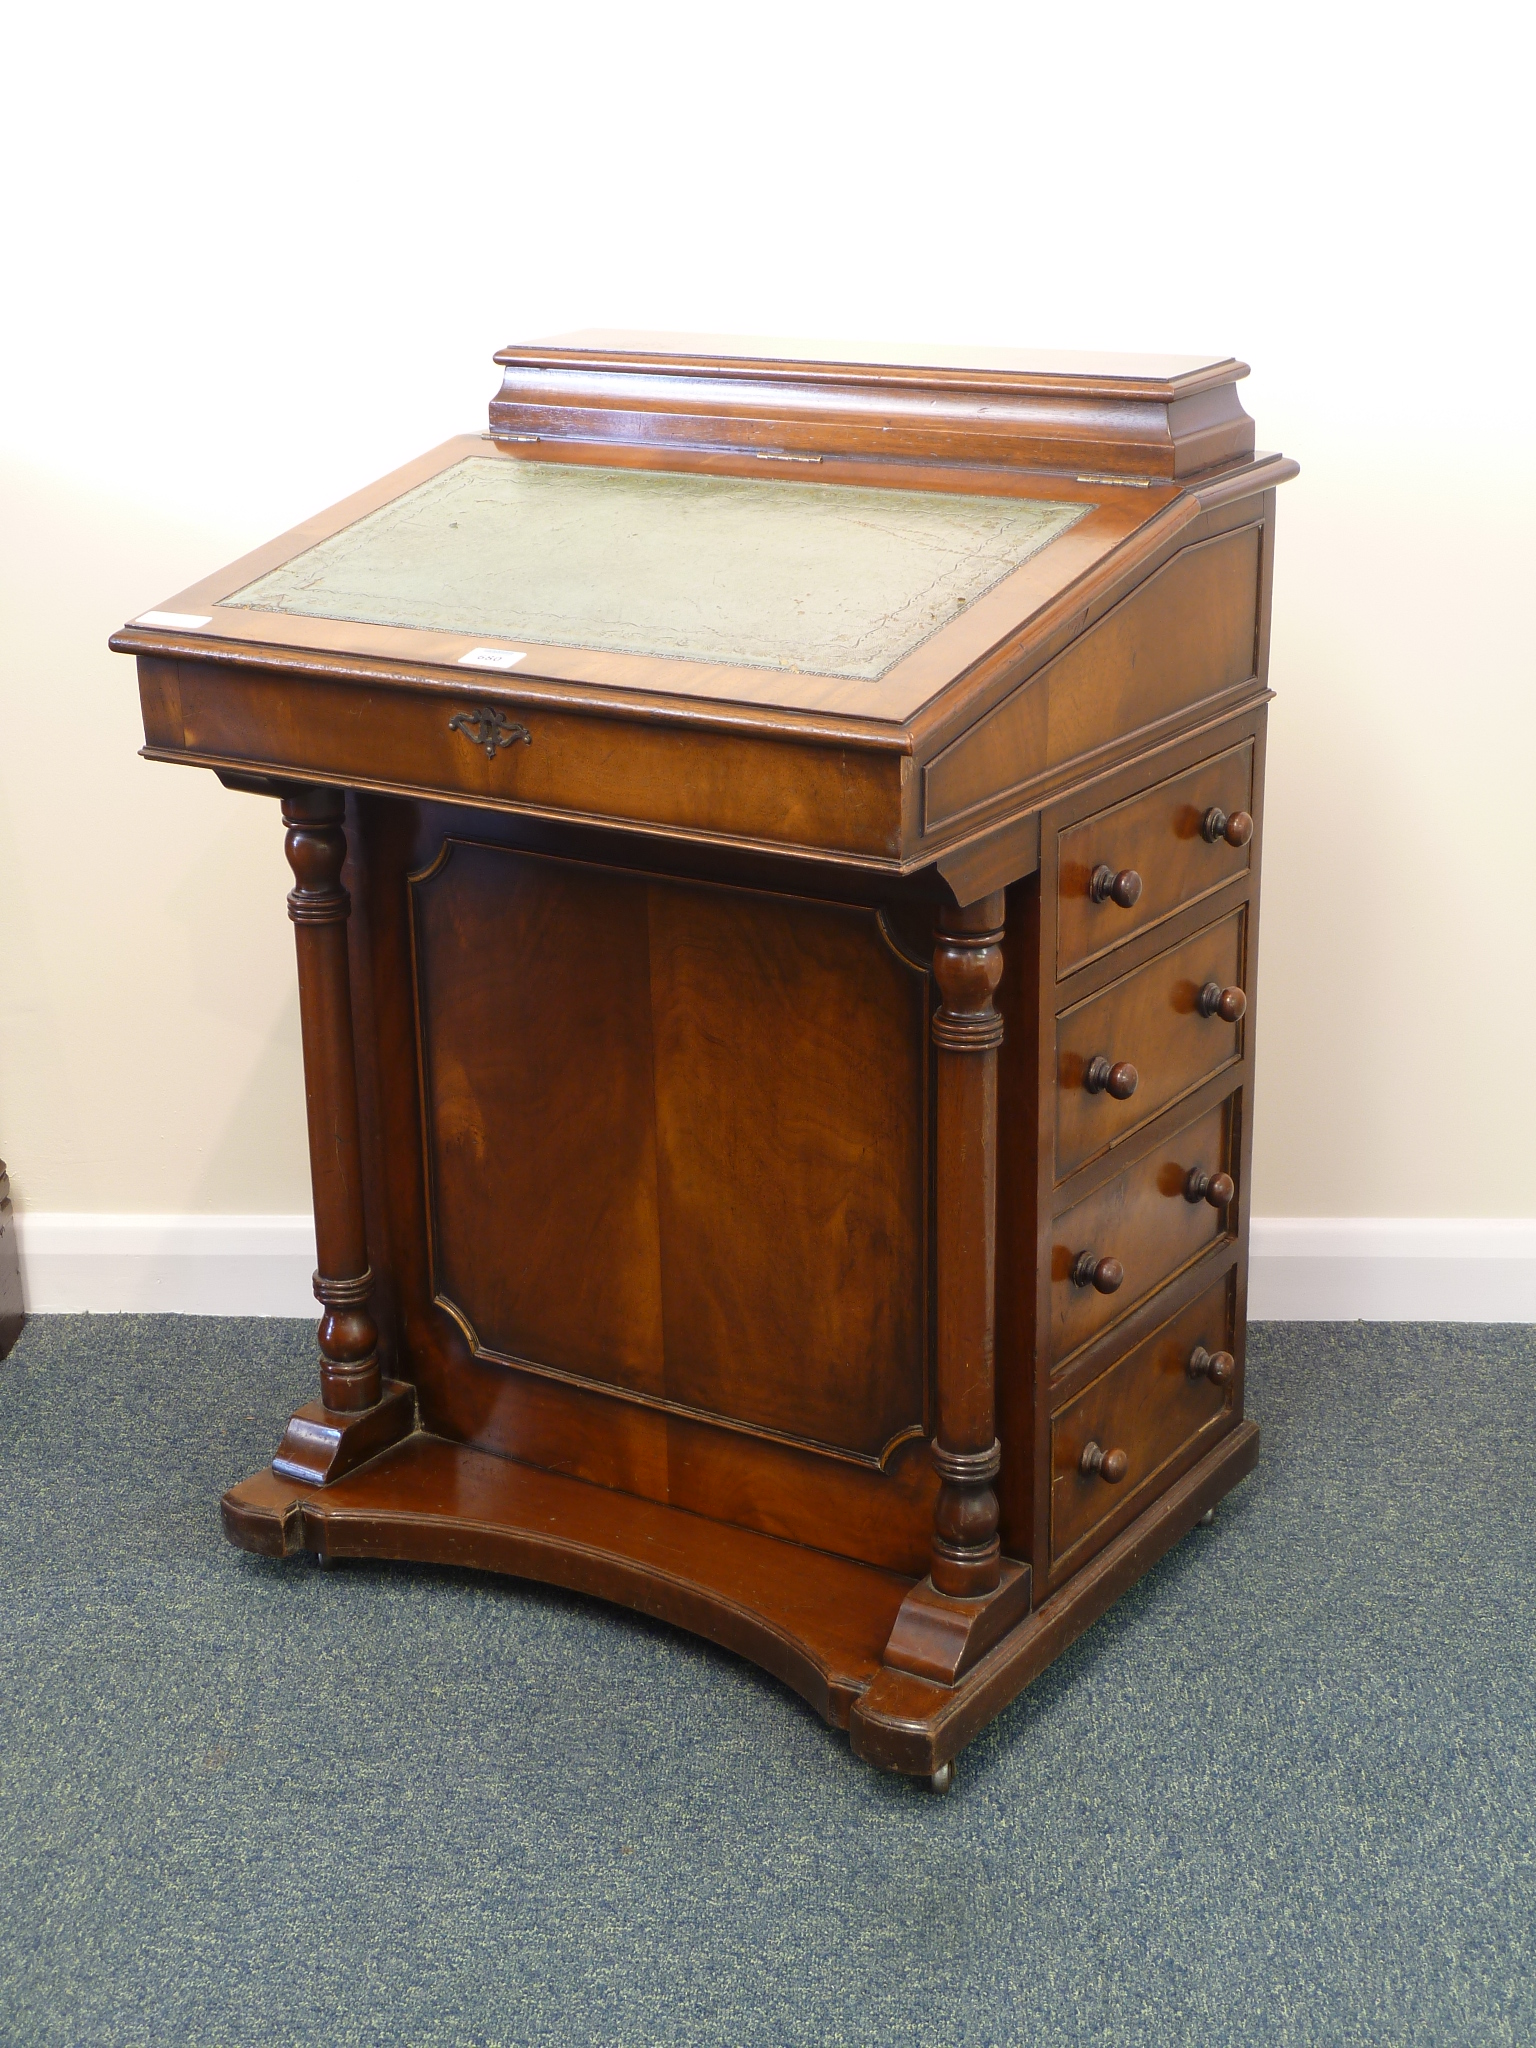 Regency style mahogany davenport, hinged fall front with inset leather writing surface